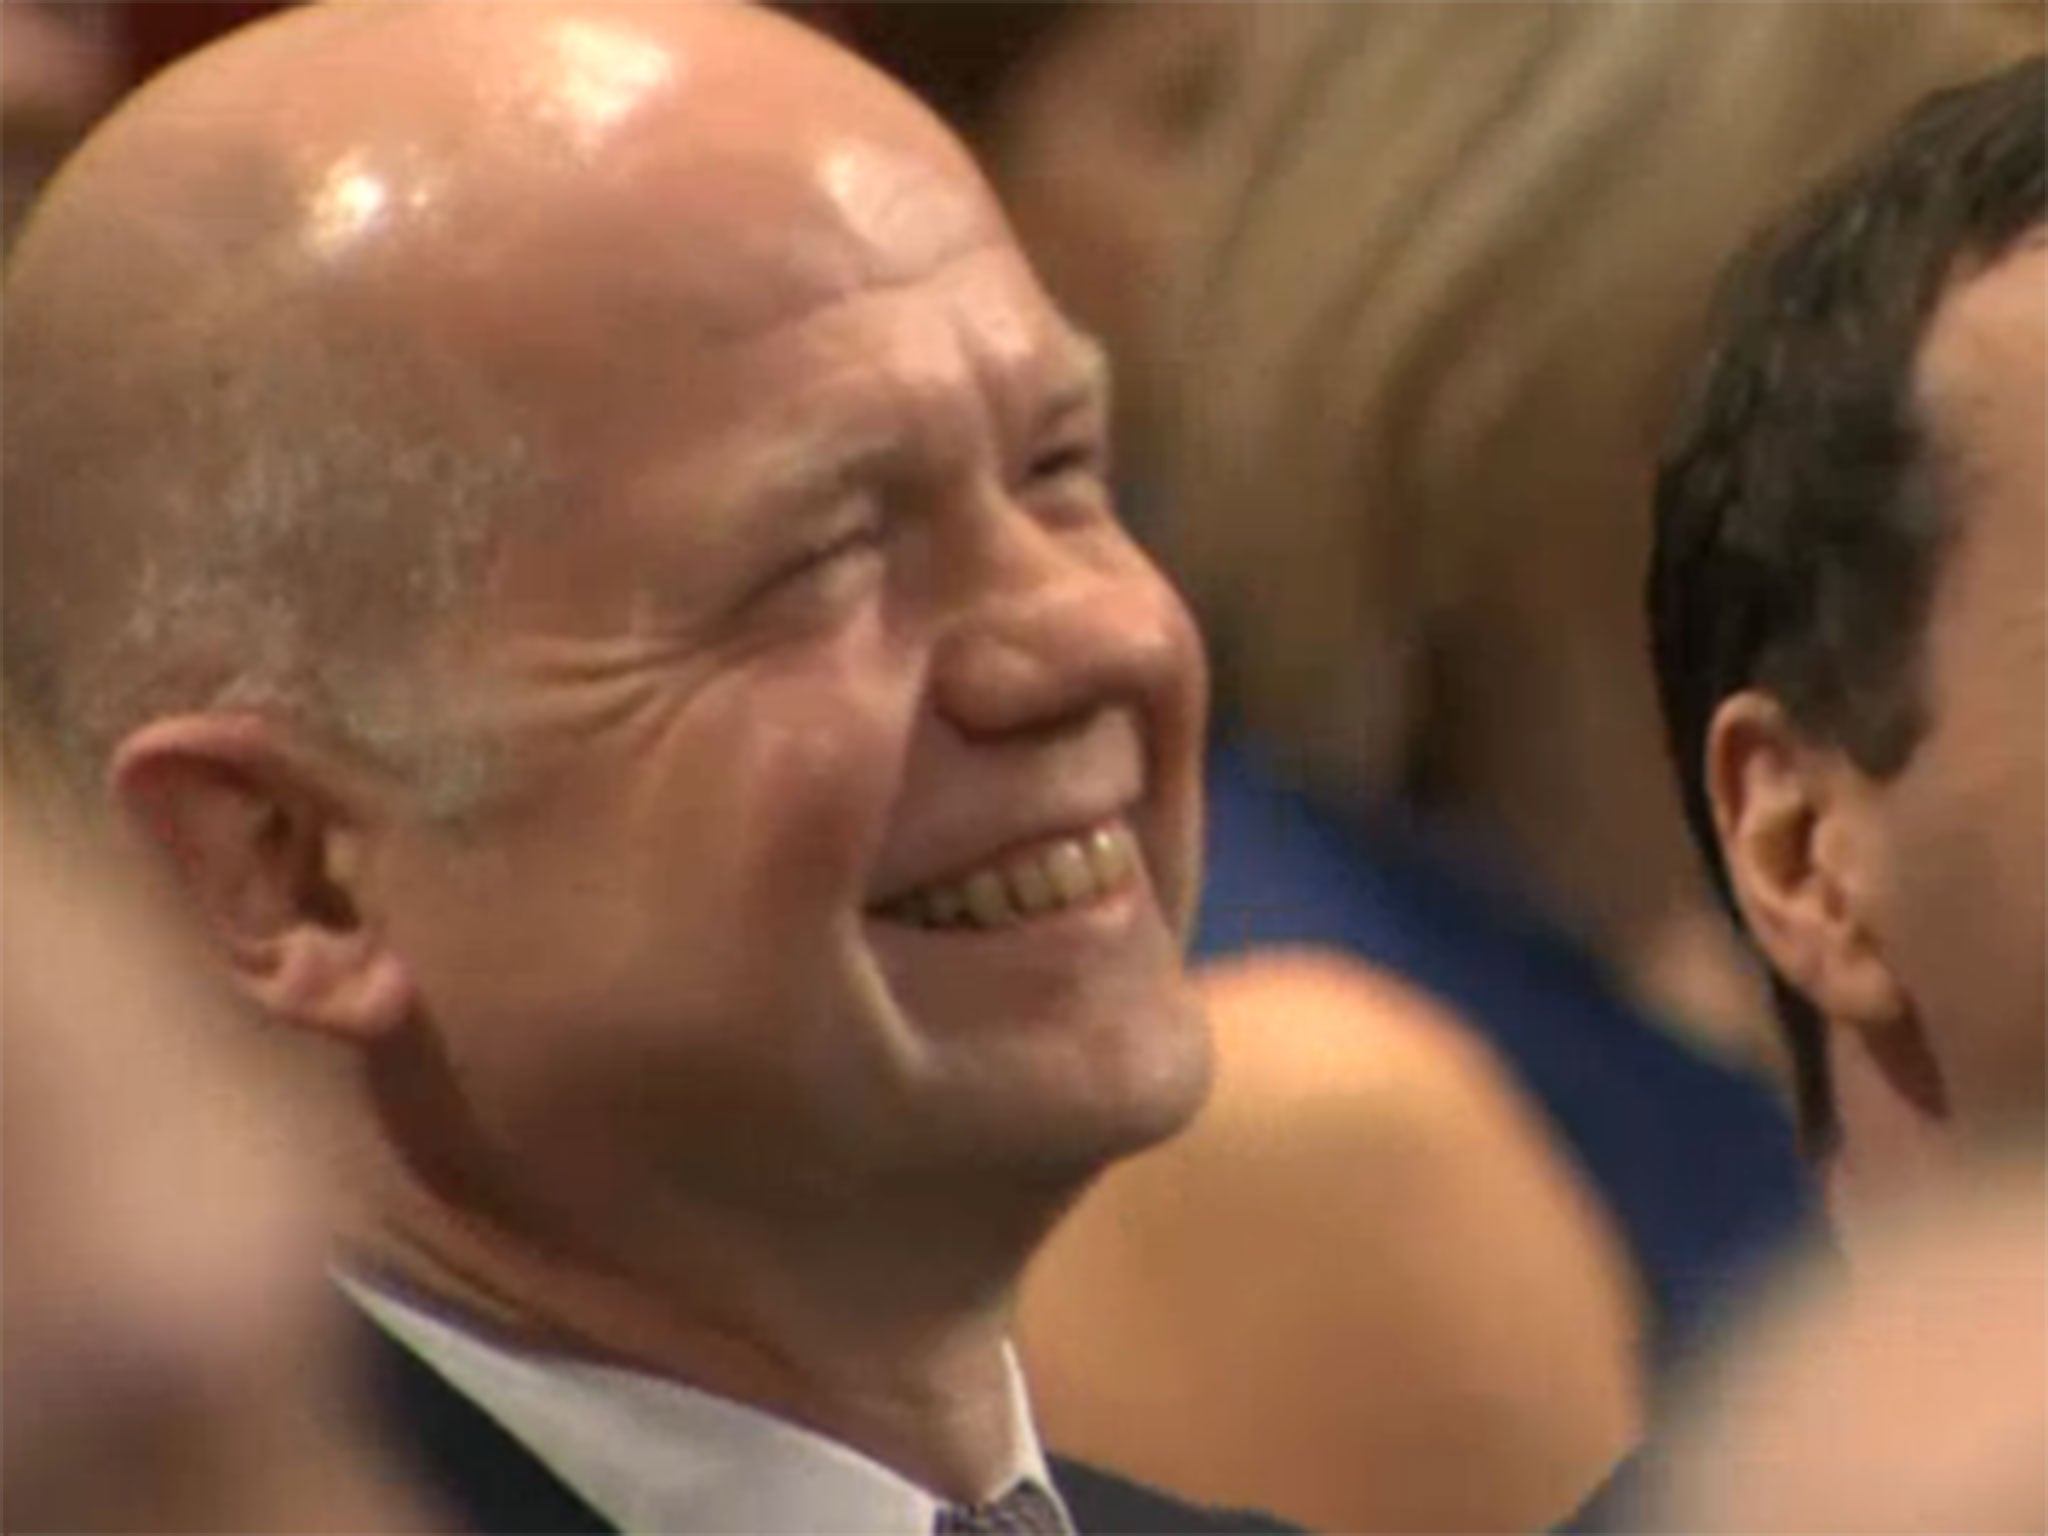 Hague laughs at Cameron's impersonation